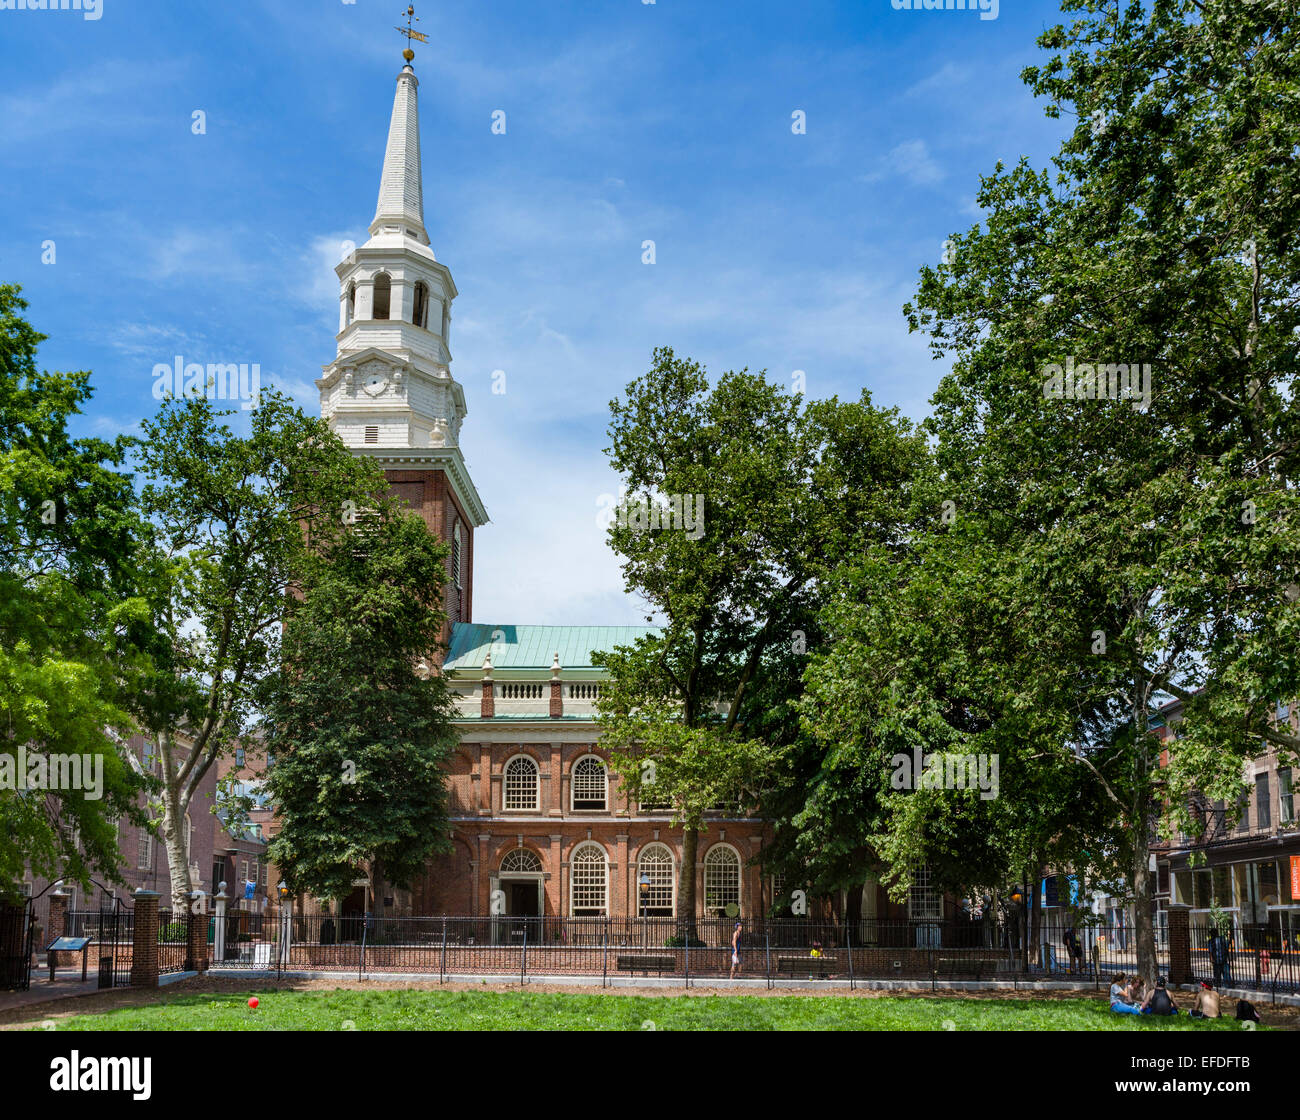 The historic 18thC Christ Church on N 2nd Street in the Old City district, Philadelphia, Pennsylvania, USA Stock Photo